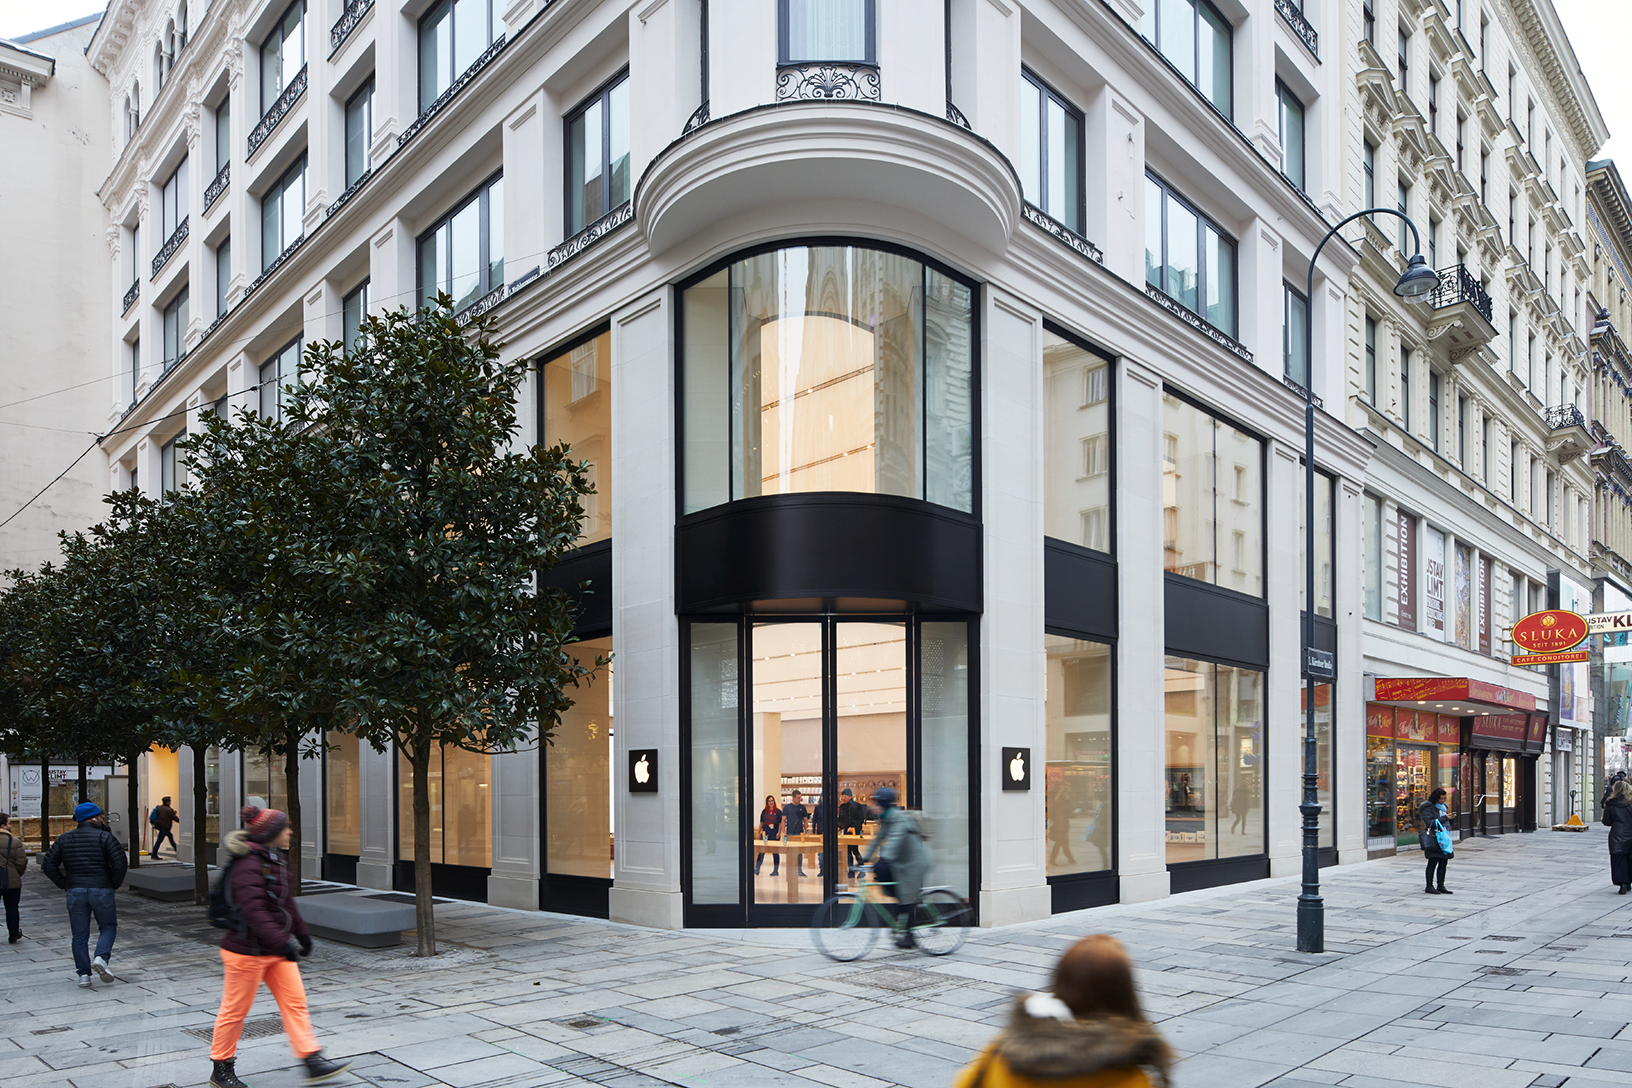 Apple releases photos and details about its first store in Austria on the eve of opening